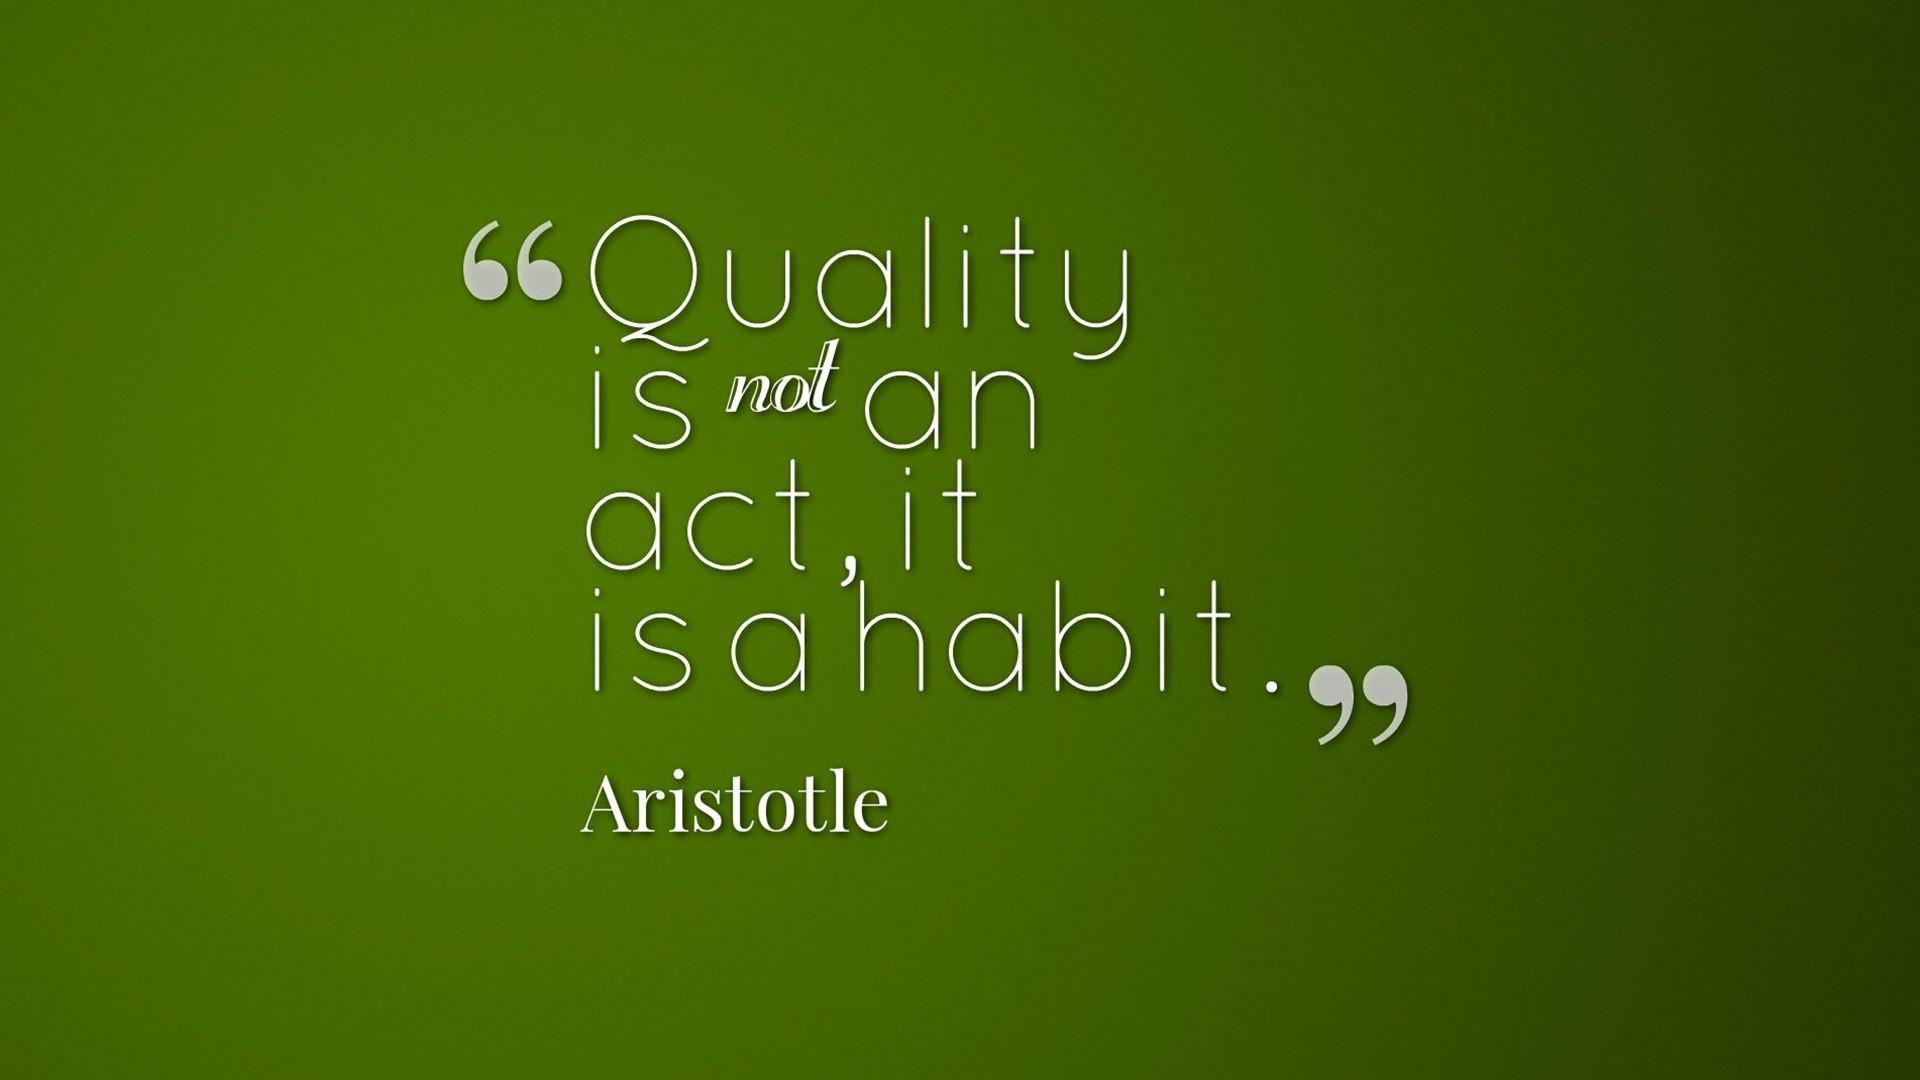 Aristotle Quotes Wallpaper HD Background Free Download